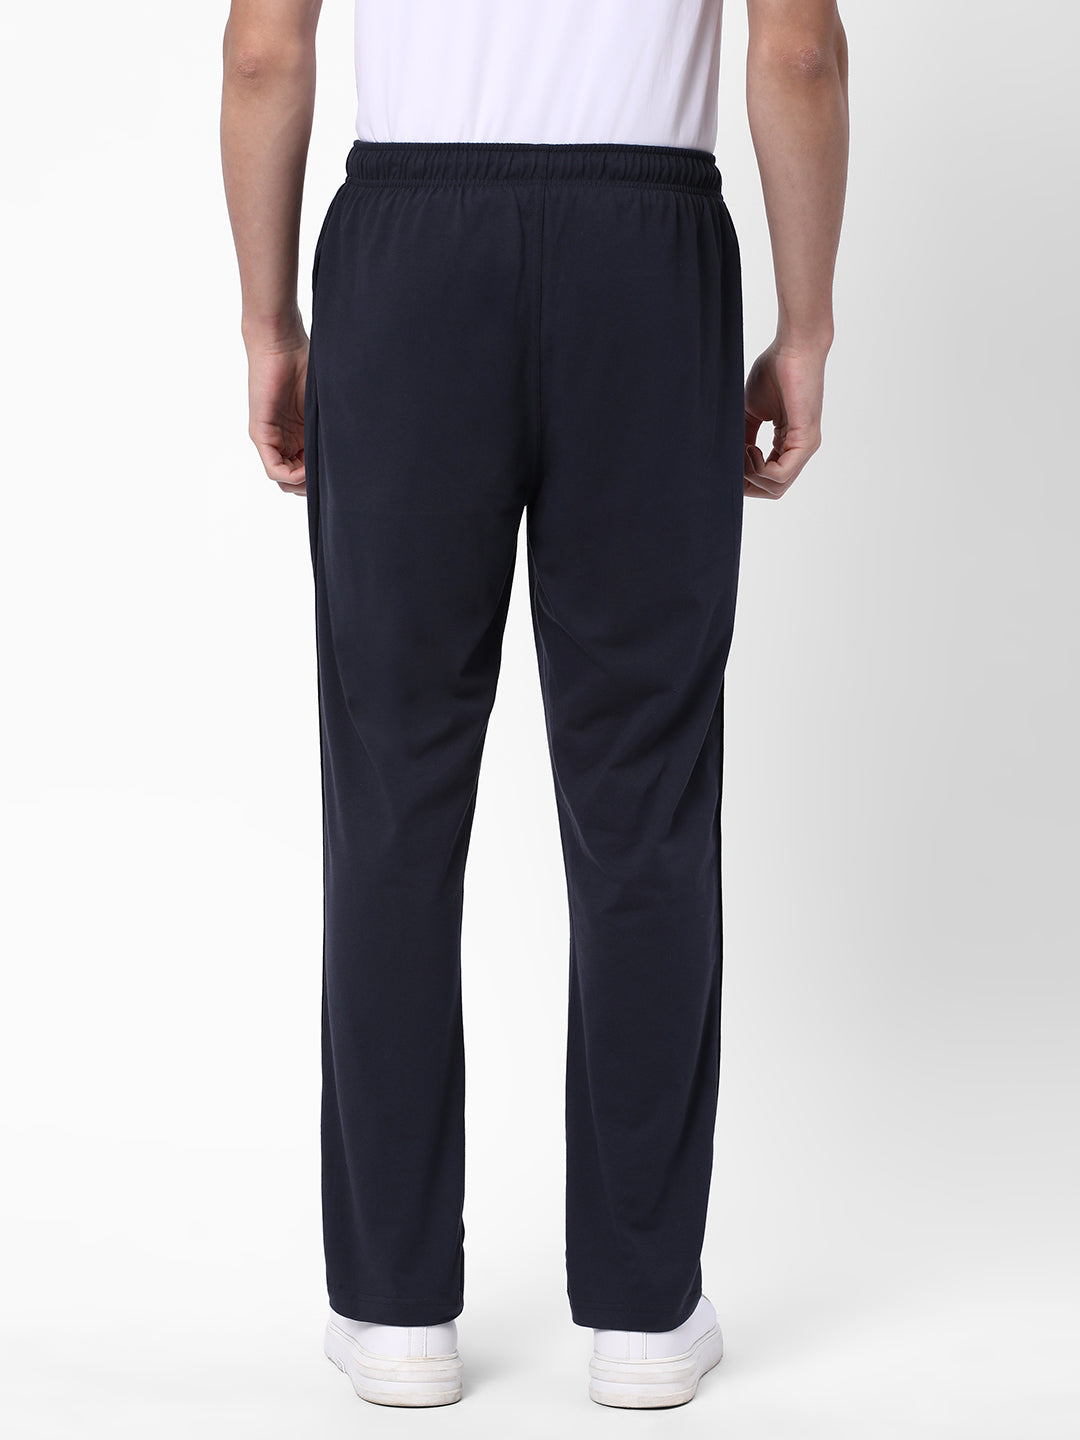 Cotstyle Men's Super Combed Cotton Regular-Fit Track Pants with Side Pocket, Colour Dark Grey-Style no.TP1101